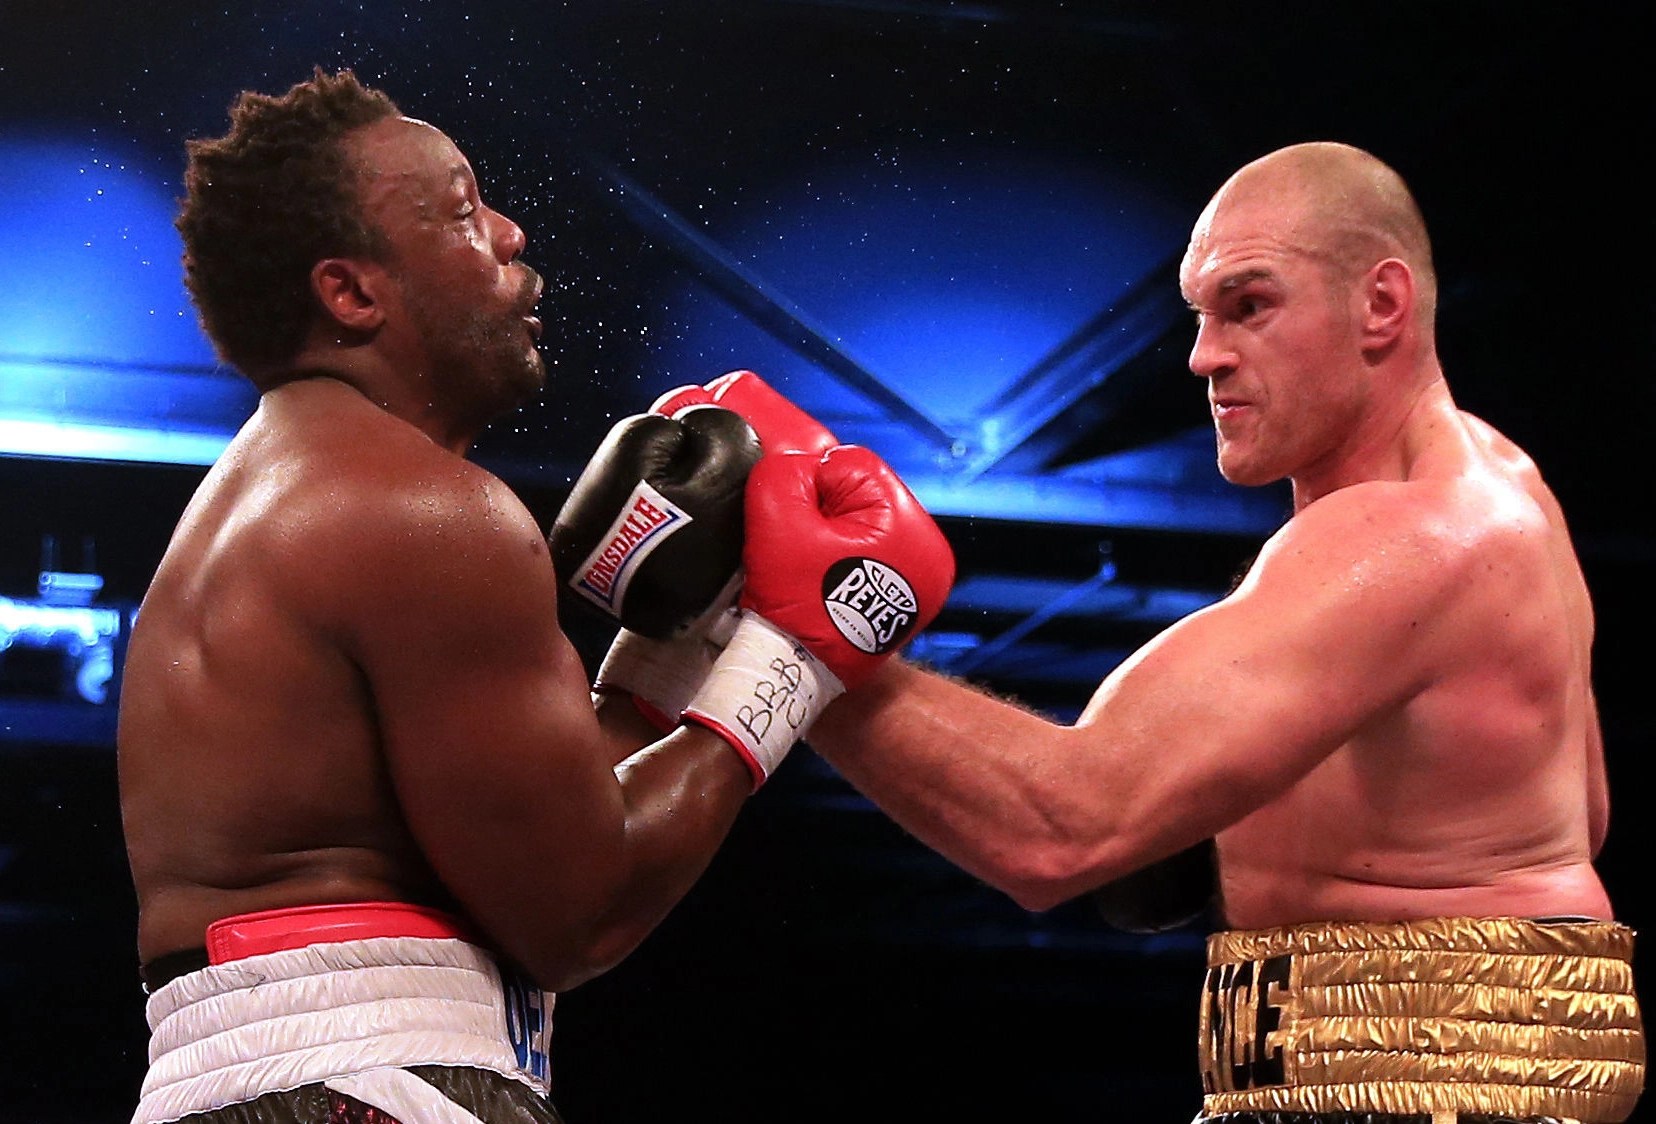 Tyson Fury vs Derek Chisora 3 Who Is the Better Knockout Artist Between Fury and Chisora?